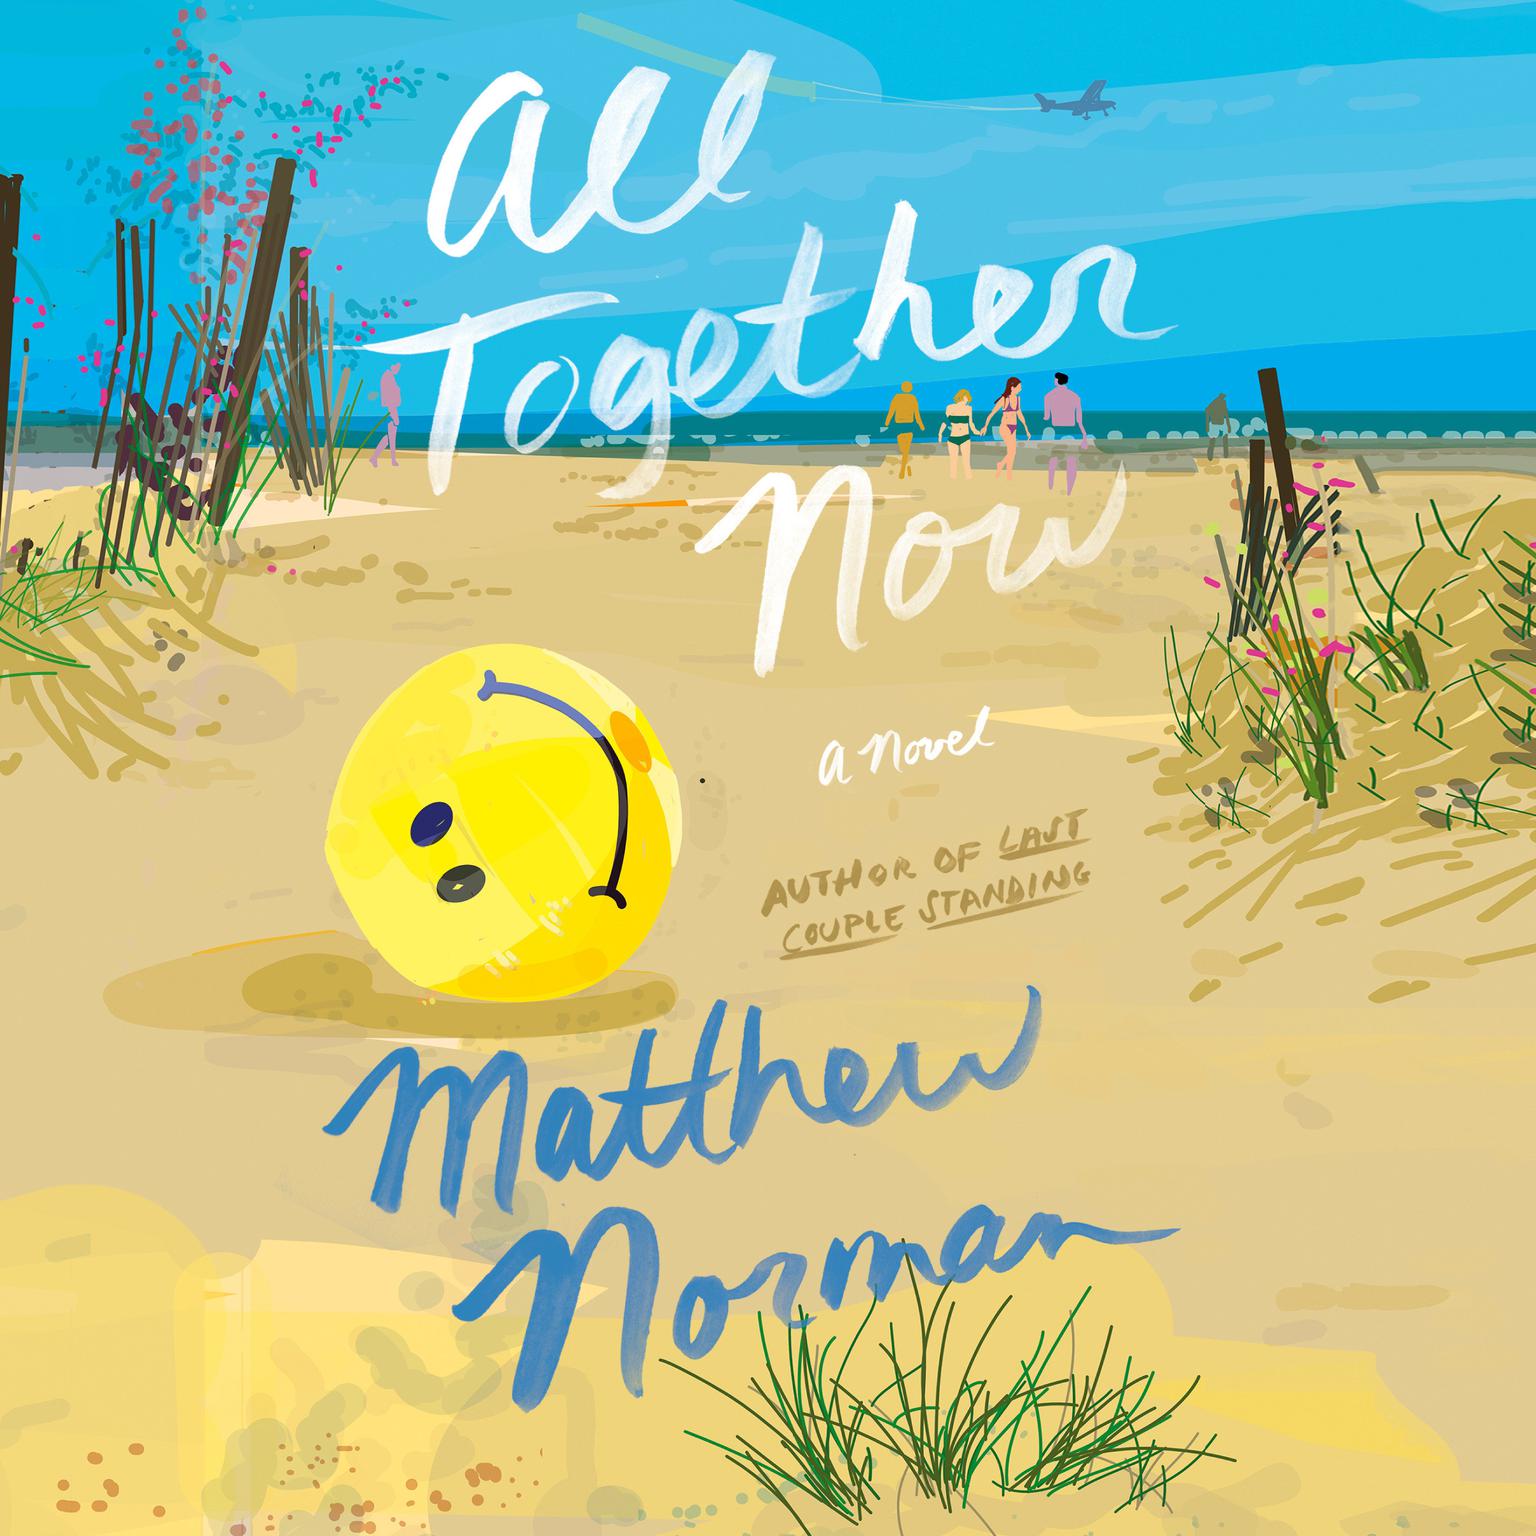 All Together Now: A Novel Audiobook, by Matthew Norman